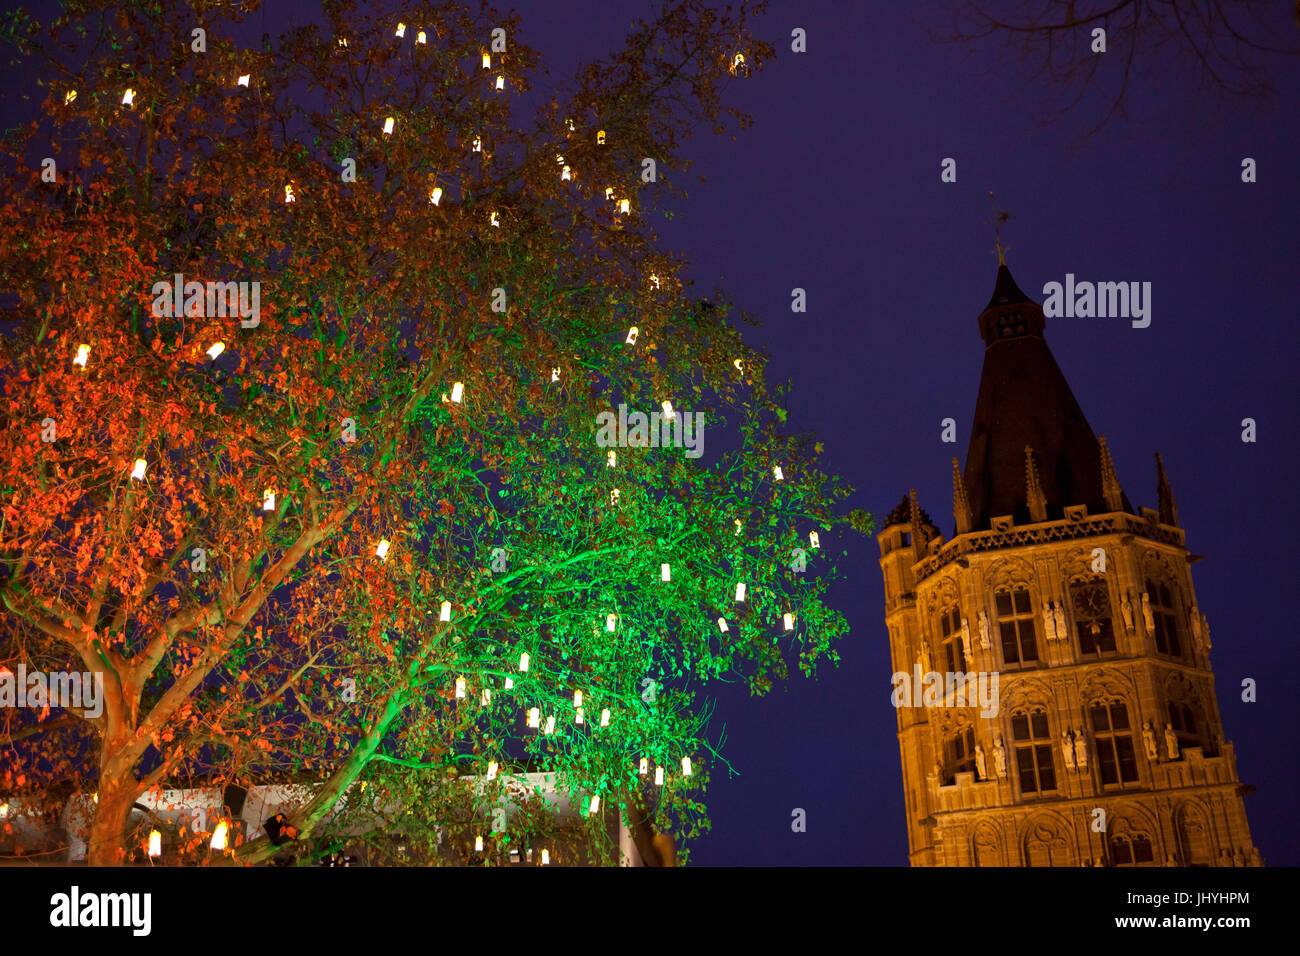 Germany, Cologne, the Christmas market at the Old Market in the historic town, with lanterns decorated tree, tower of the historic town hall. Stock Photo